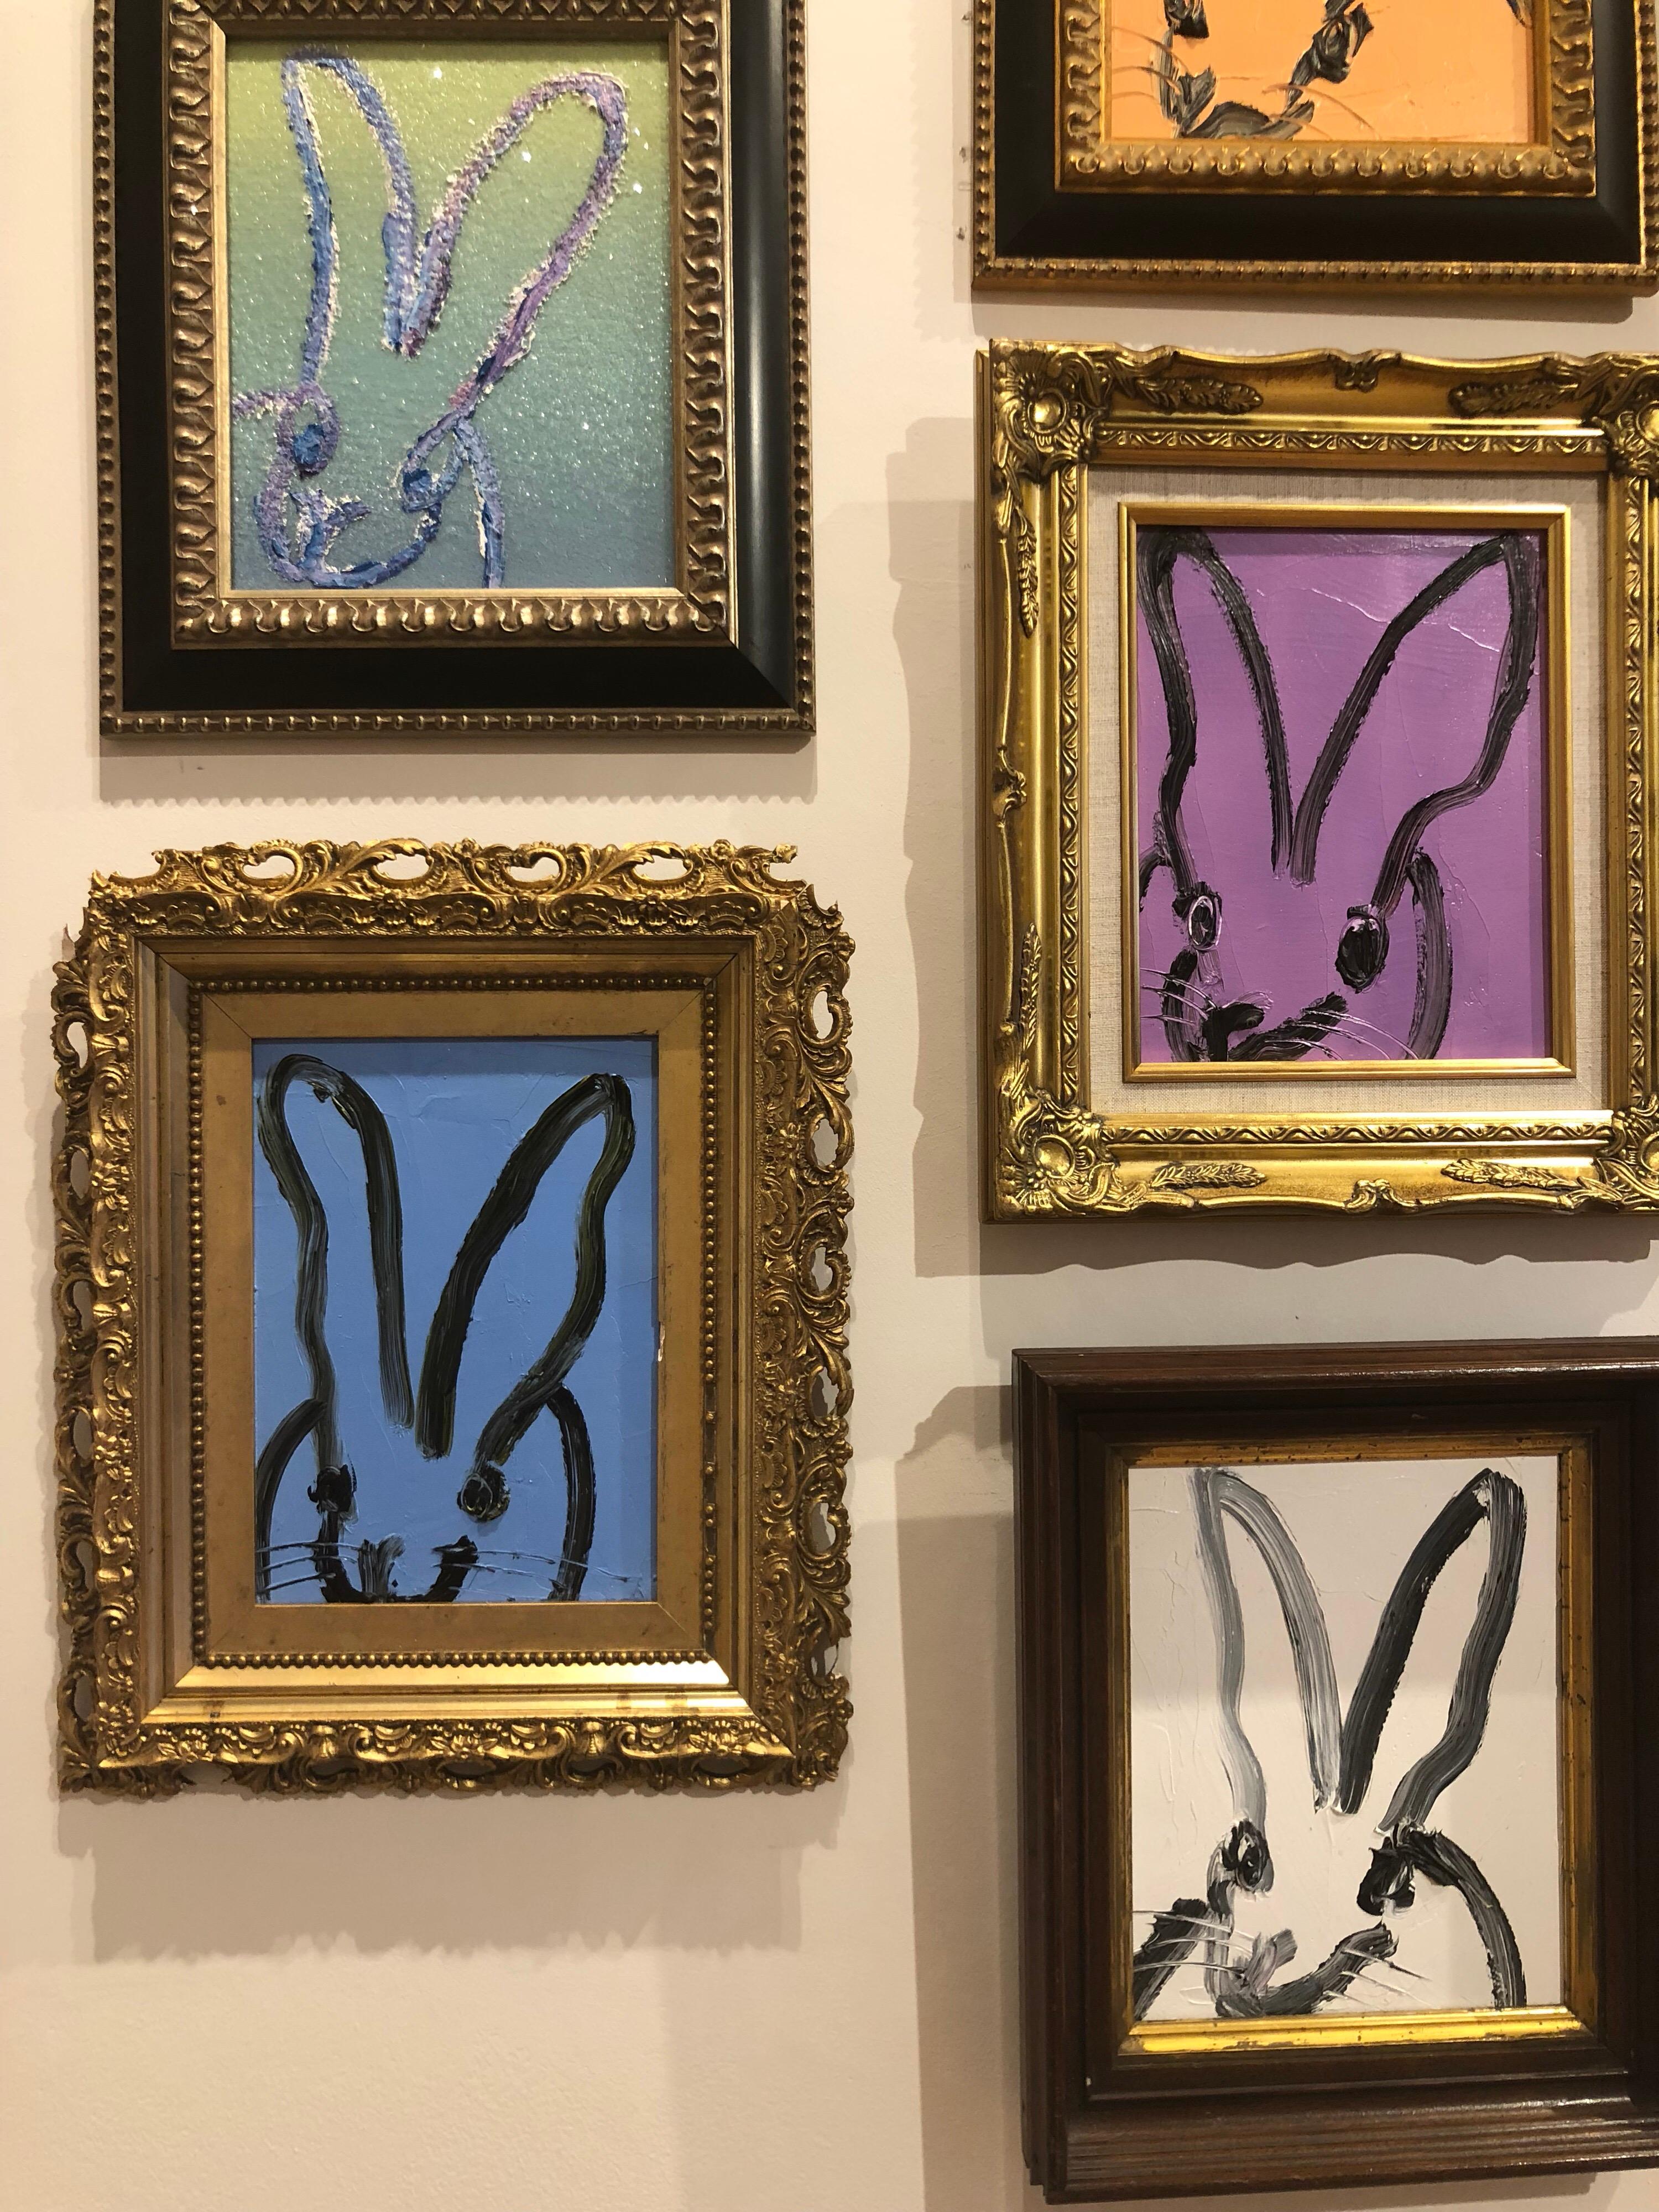 Blue Bunny - Painting by Hunt Slonem